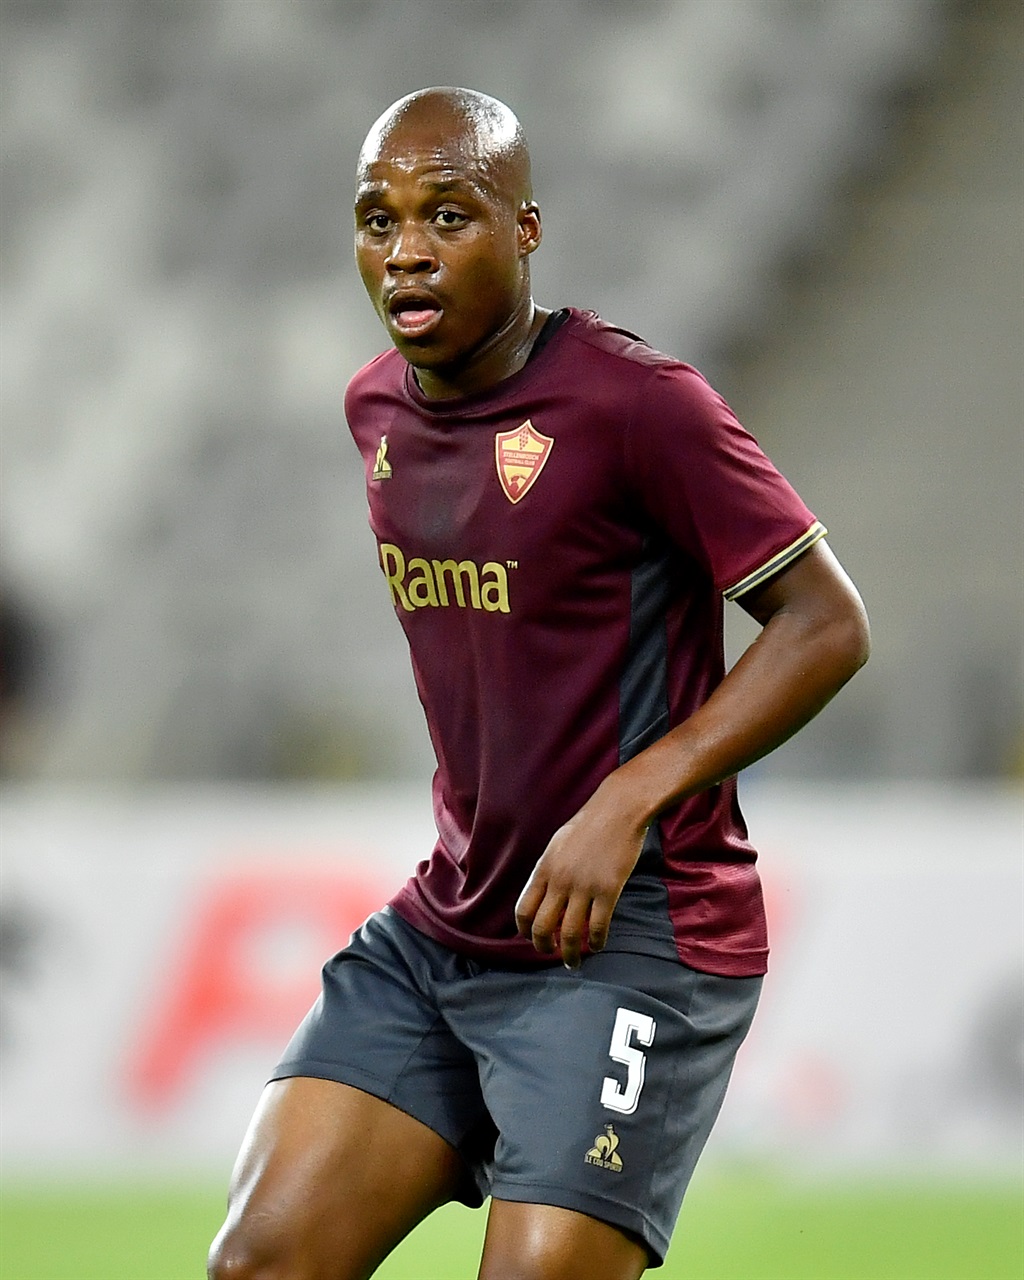 CAPE TOWN, SOUTH AFRICA - NOVEMBER 28: Darrel Matsheke of Stellenbosch FC during the DStv Premiership match between Cape Town Spurs and Stellenbosch FC at DHL Cape Town Stadium on November 28, 2023 in Cape Town, South Africa. (Photo by Ashley Vlotman/Gallo Images)